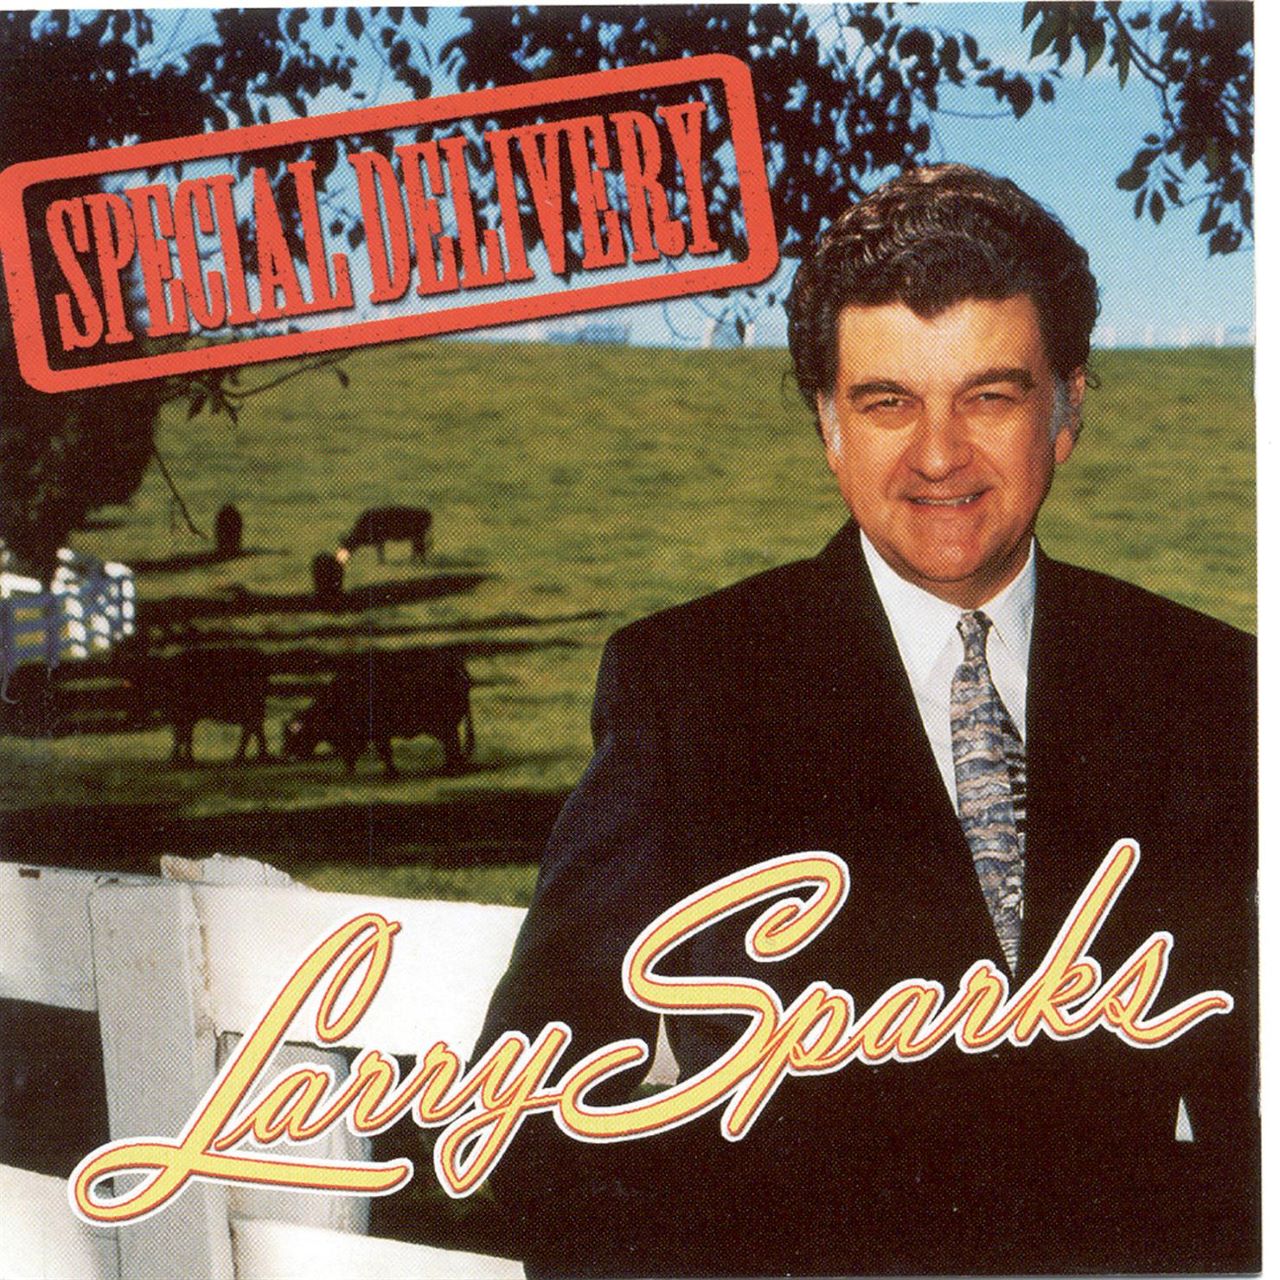 Larry Sparks - Special Delivery cover album